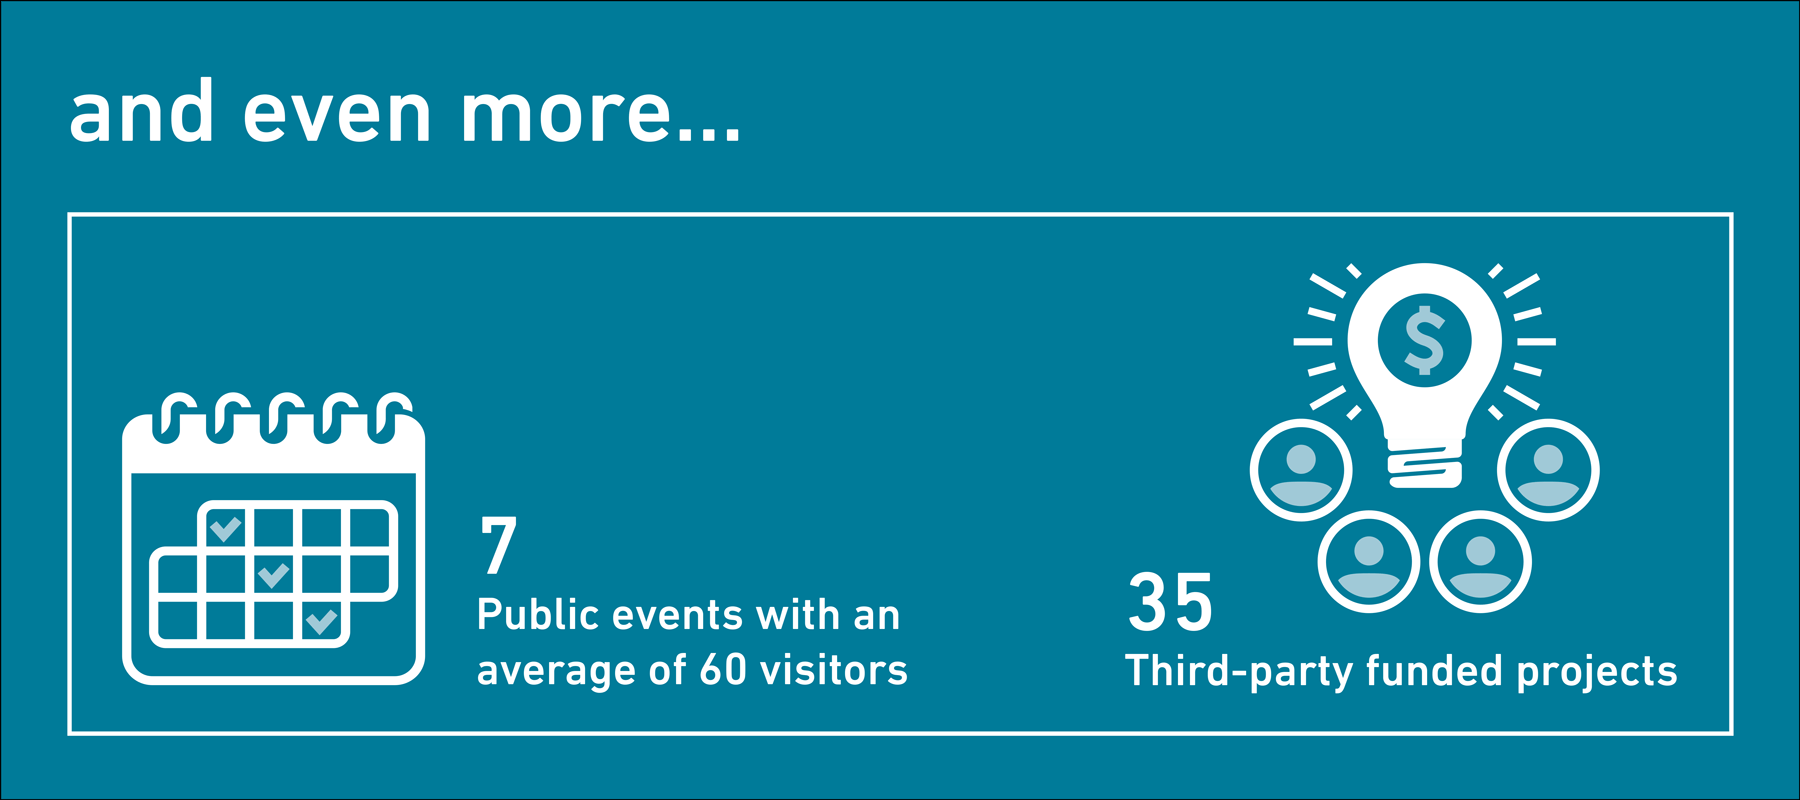 Enlarged view: And even more: 7 public events with an average of 60 visitors. 35 third-party funded projects.